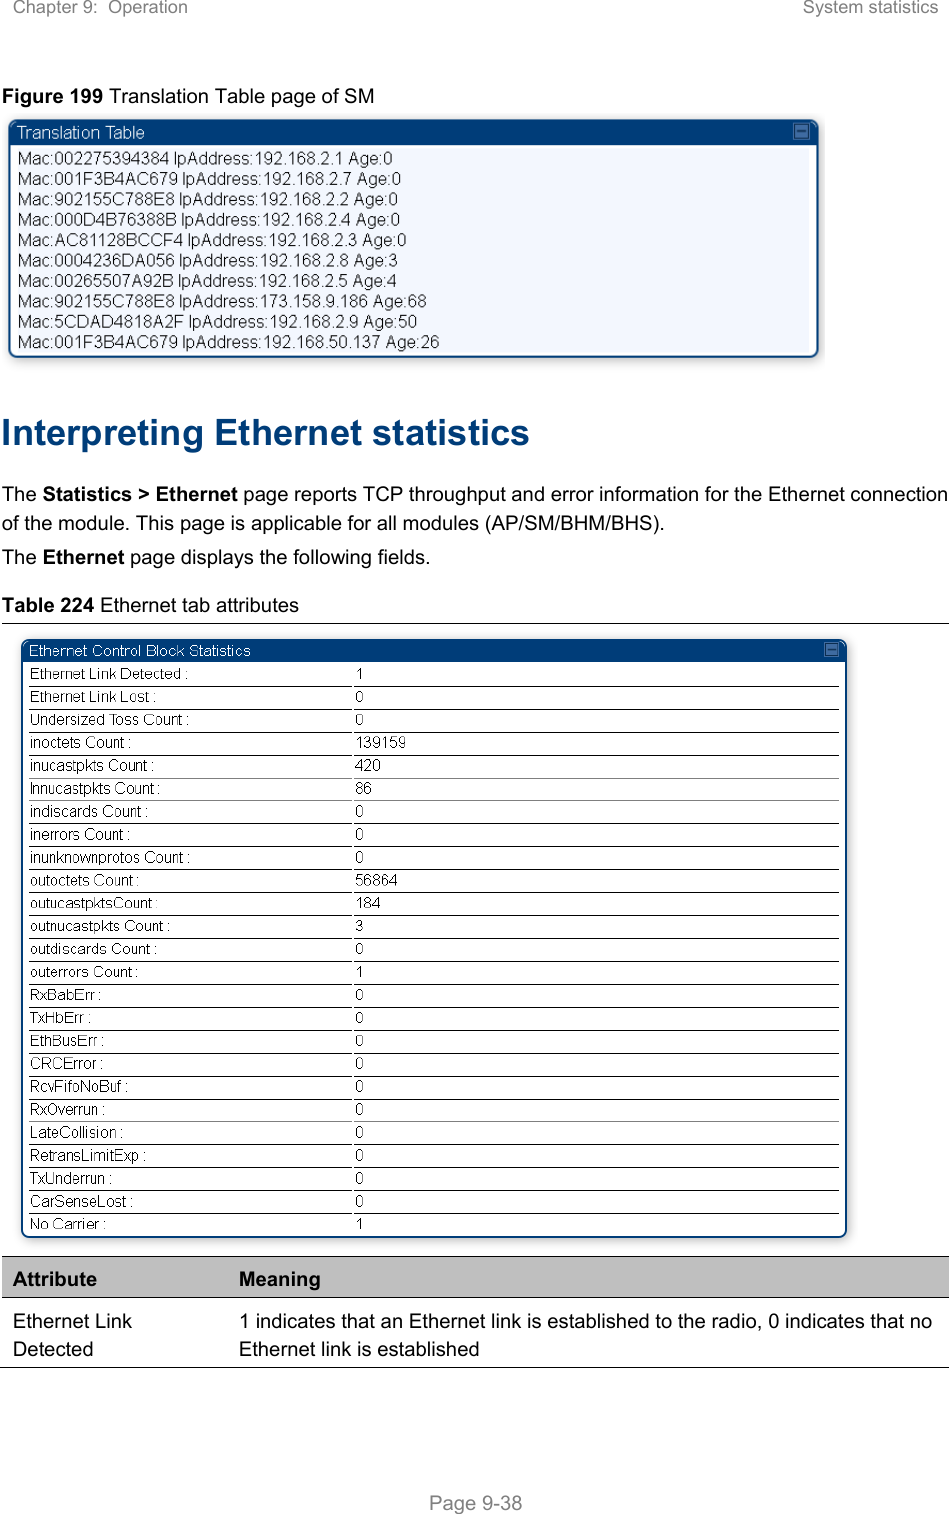 Chapter 9:  Operation  System statistics   Page 9-38 Figure 199 Translation Table page of SM  Interpreting Ethernet statistics The Statistics &gt; Ethernet page reports TCP throughput and error information for the Ethernet connection of the module. This page is applicable for all modules (AP/SM/BHM/BHS). The Ethernet page displays the following fields. Table 224 Ethernet tab attributes  Attribute  Meaning Ethernet Link Detected 1 indicates that an Ethernet link is established to the radio, 0 indicates that no Ethernet link is established 